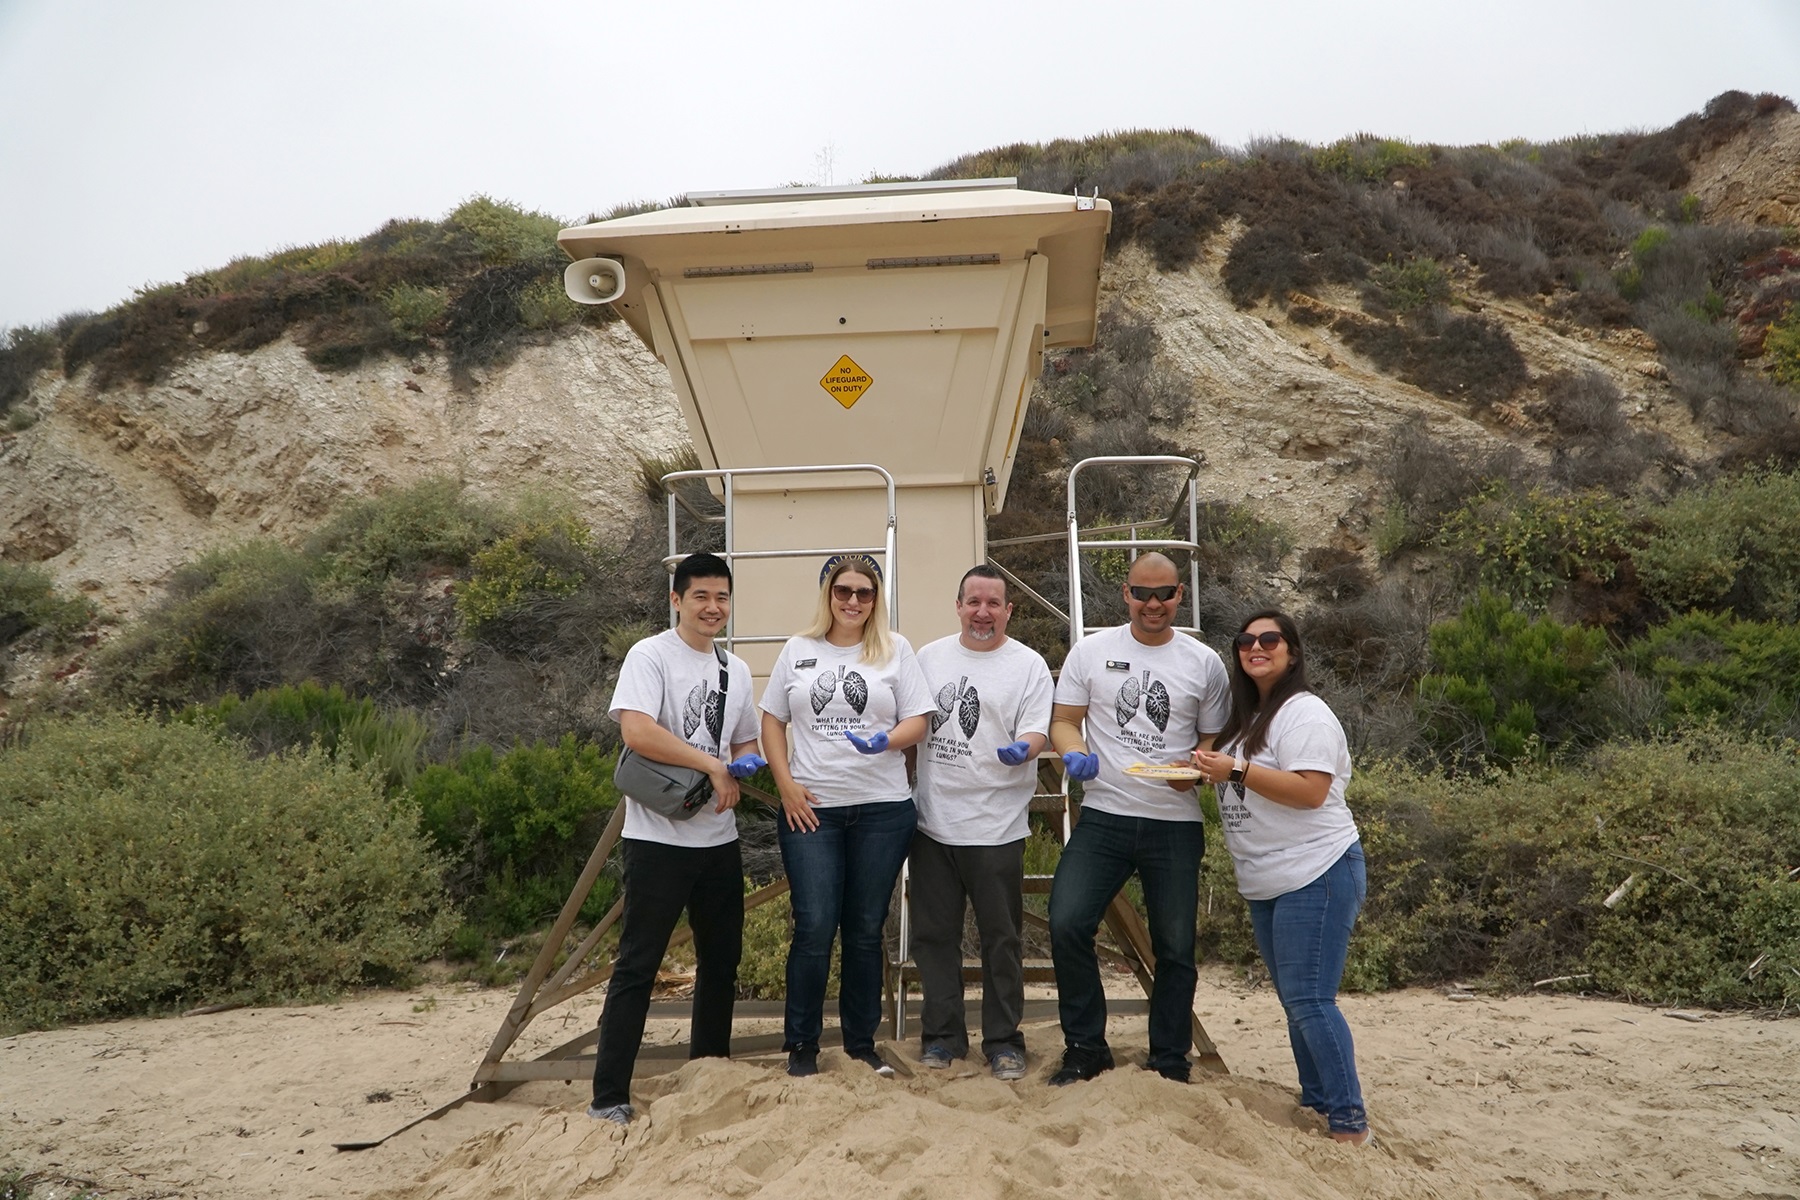 OCDE staff at a beach cleanup event